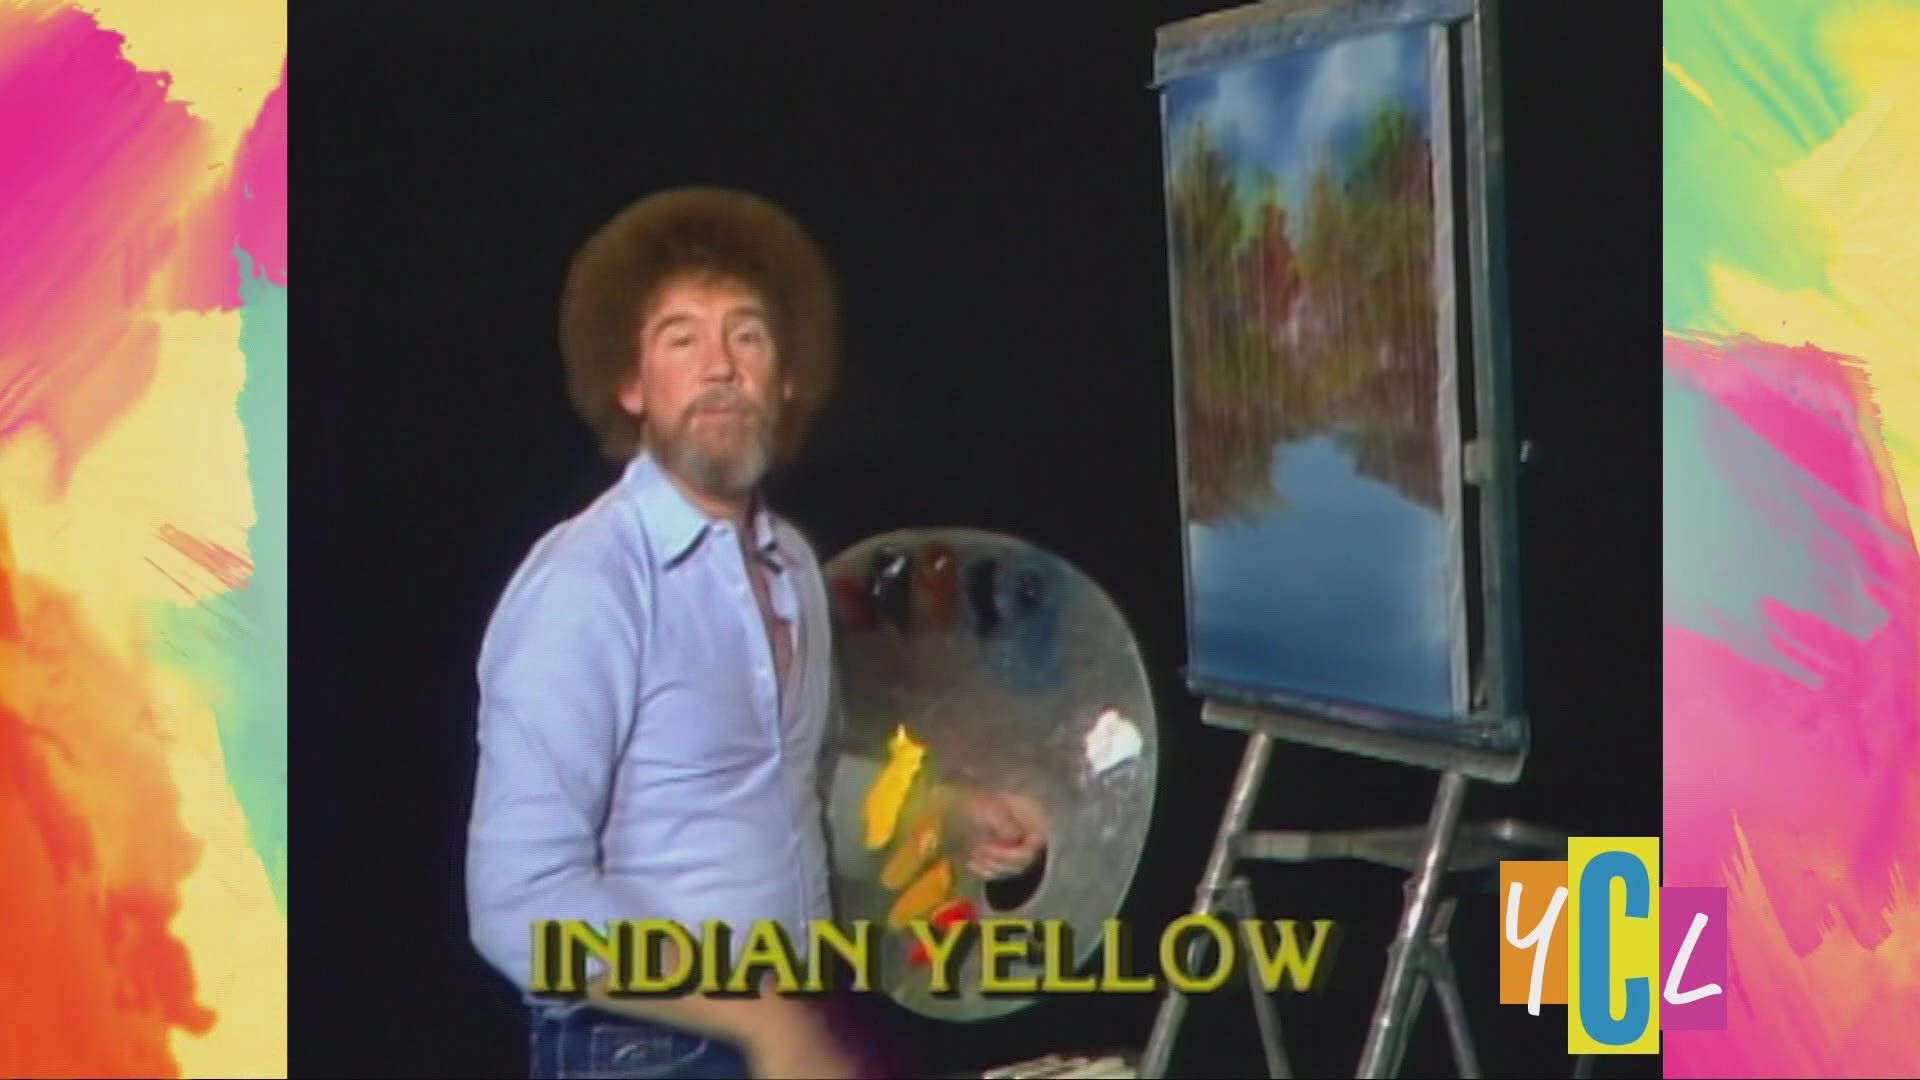 Celebrate the legacy of the "Happy Painter" Bob Ross and his classic television show.